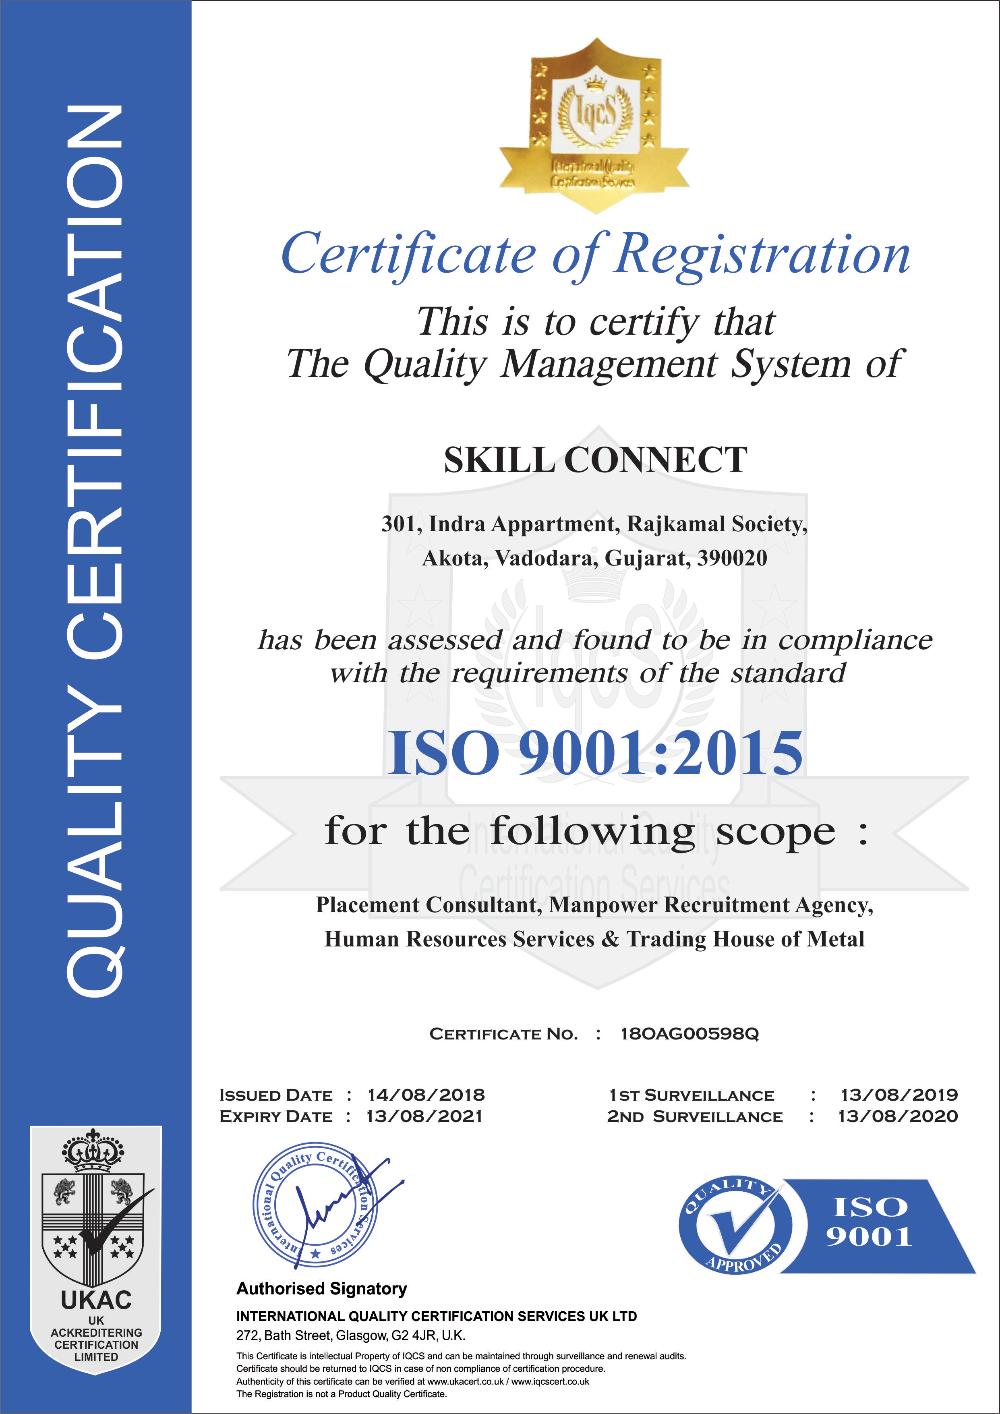 Human Resources Services - Certificate